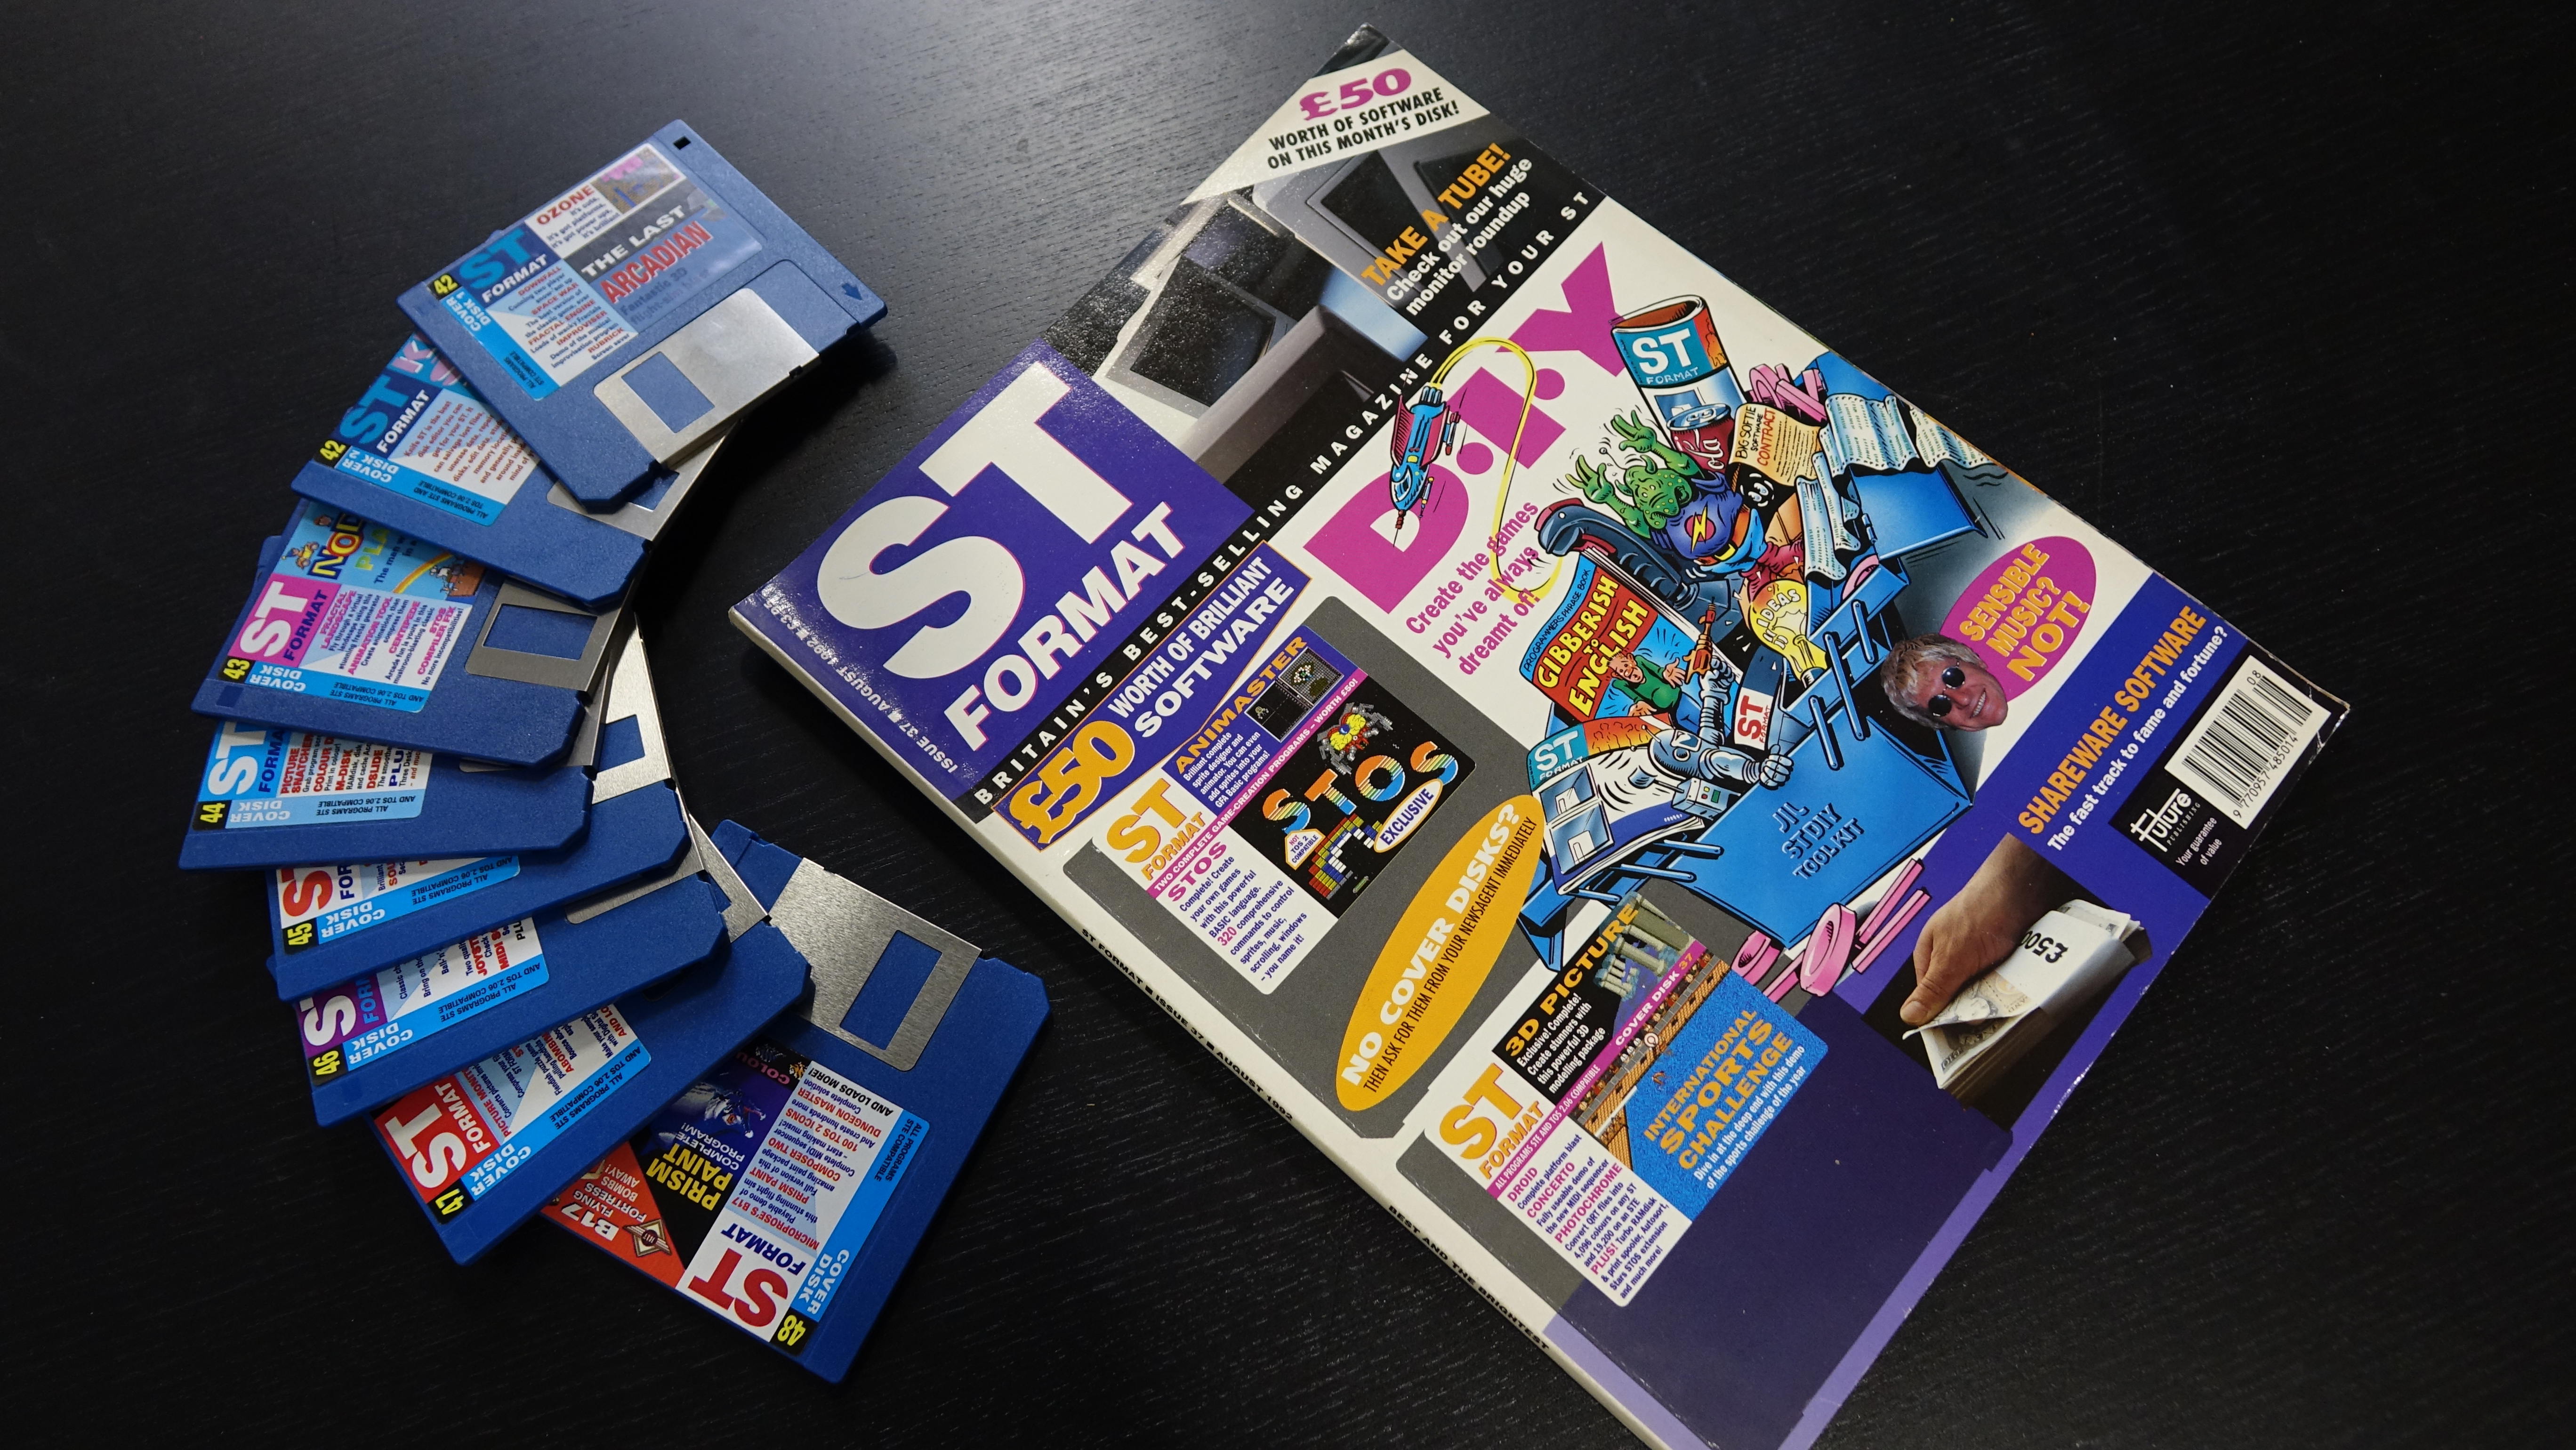 ST Format issue 37. This magazine contained a full copy of the original Droid game.